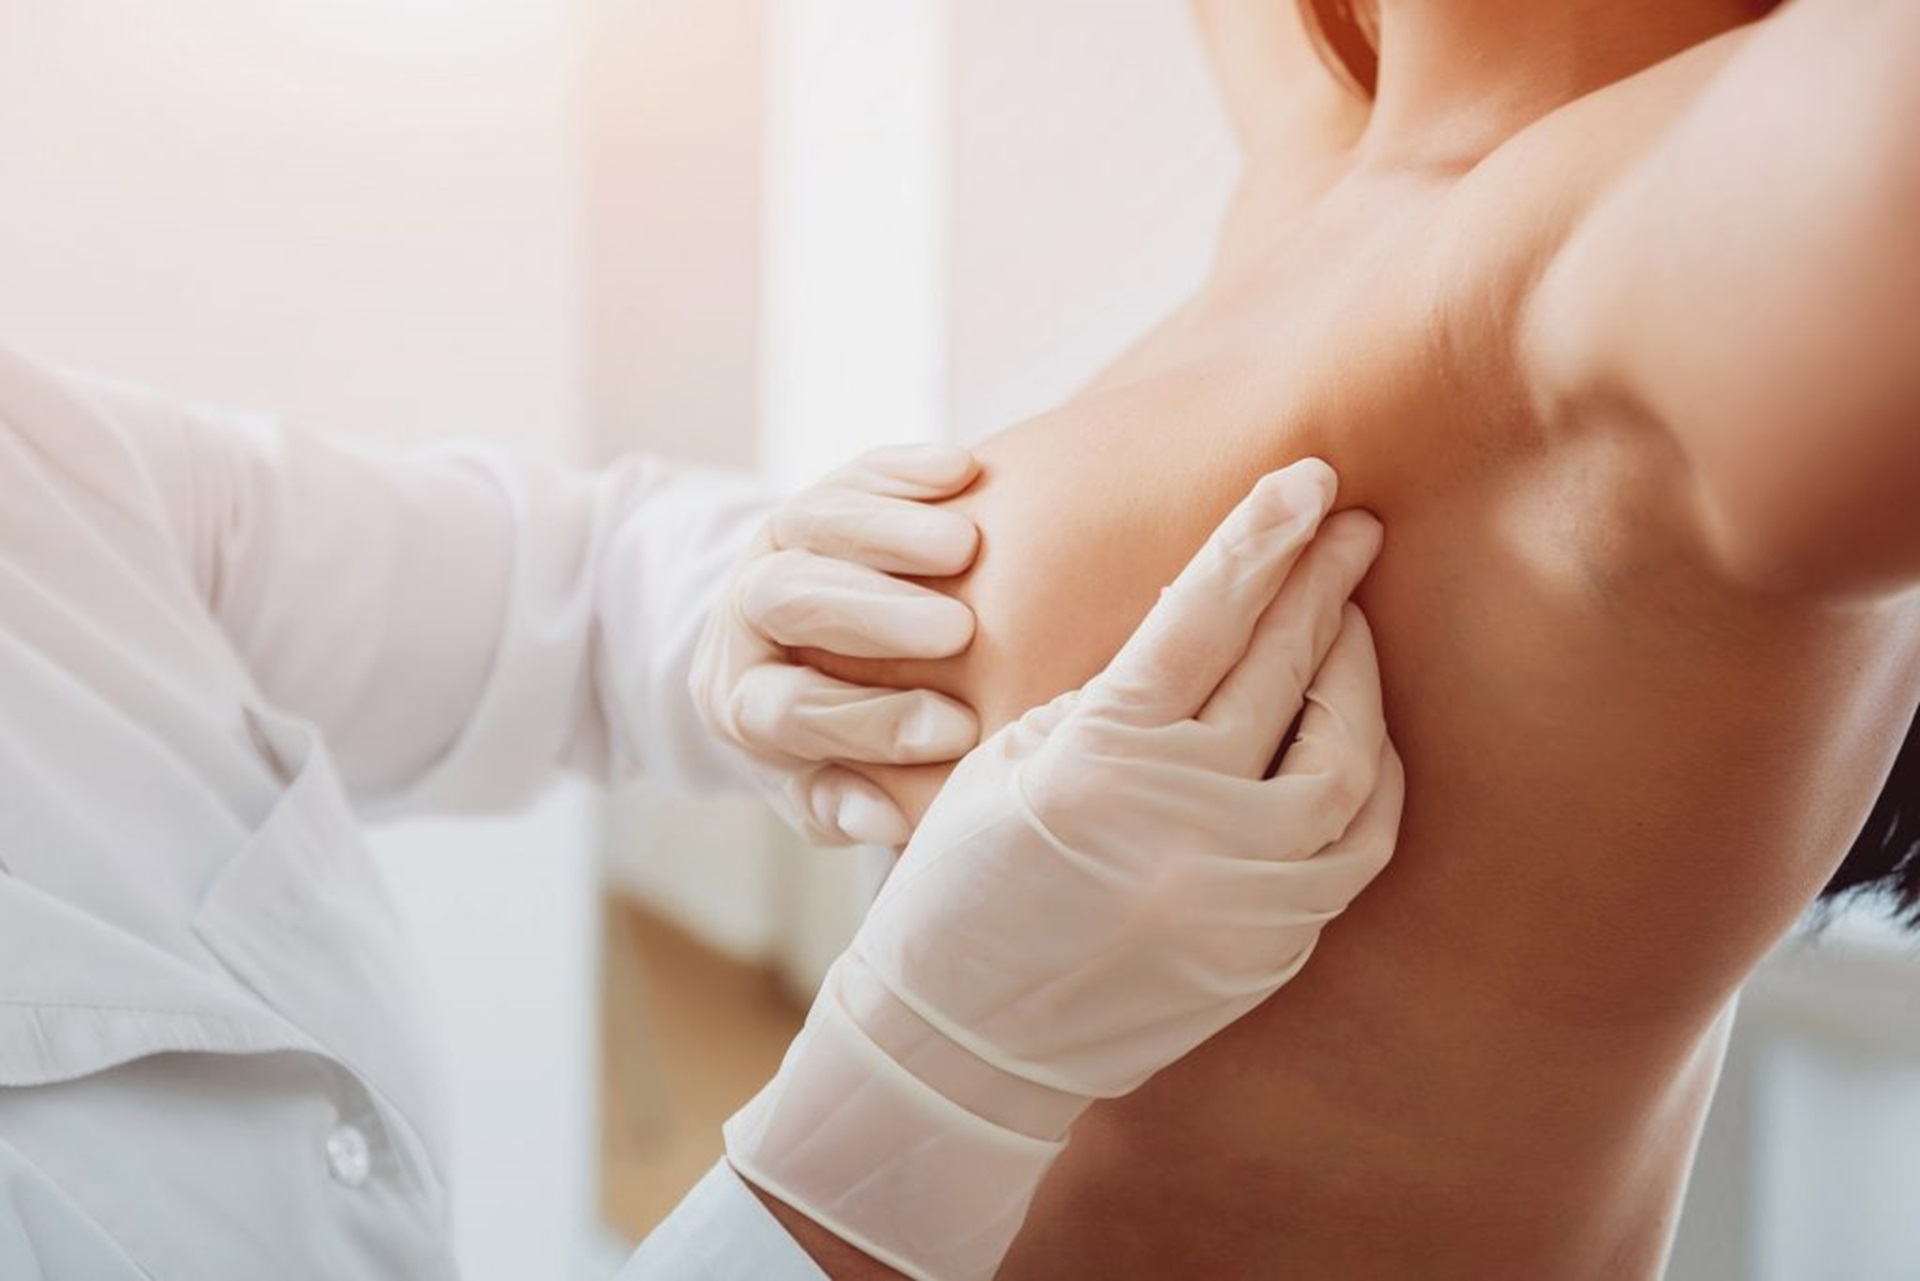 Benefits Of best breast augmentation surgery in aberdeen, Uk by Dr Jamil Ahmed